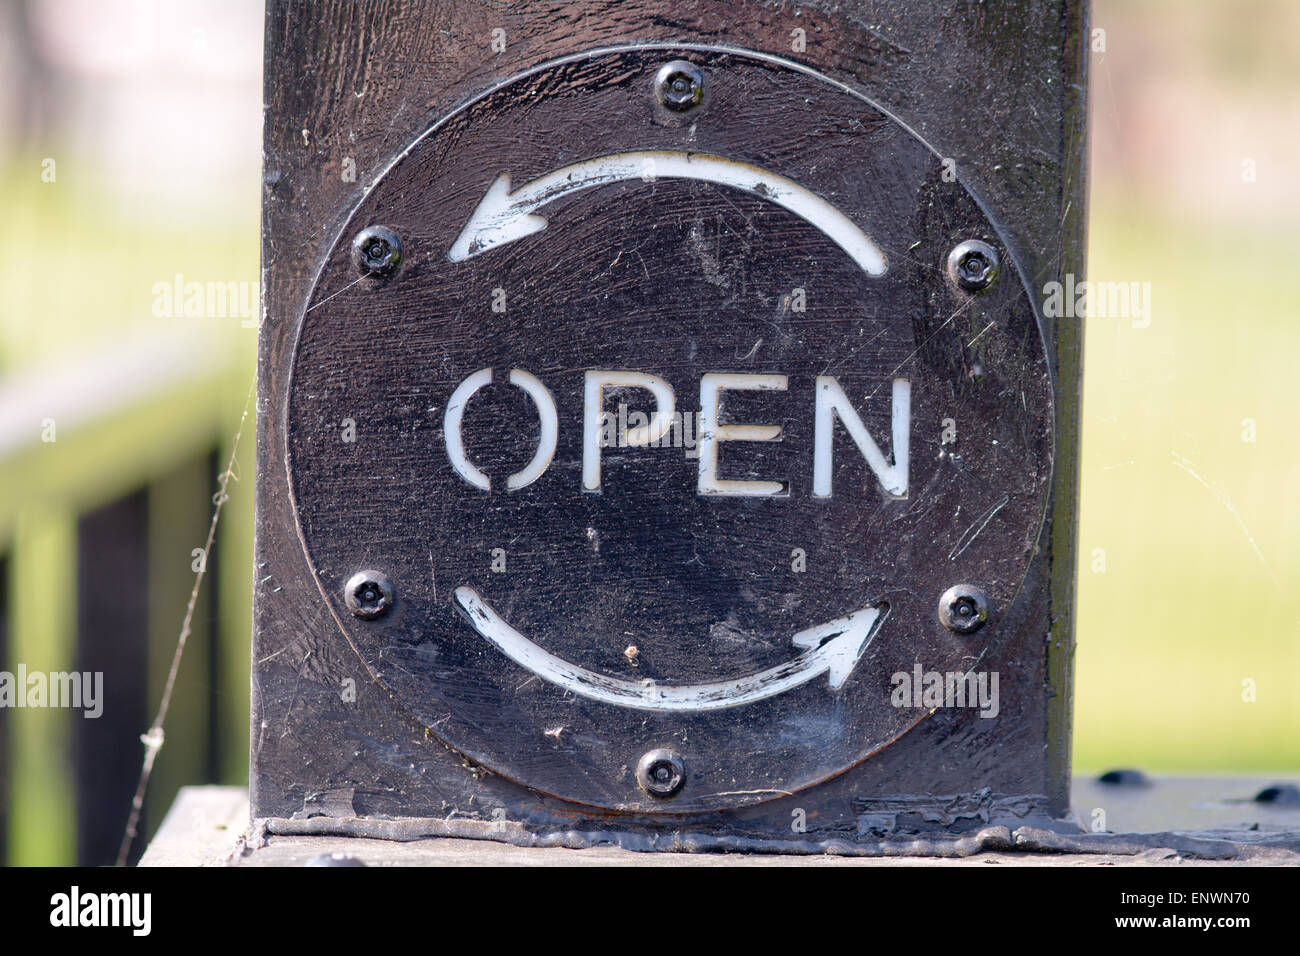 Open sign on canal lock gate with anti-clockwise direction arrow Stock Photo